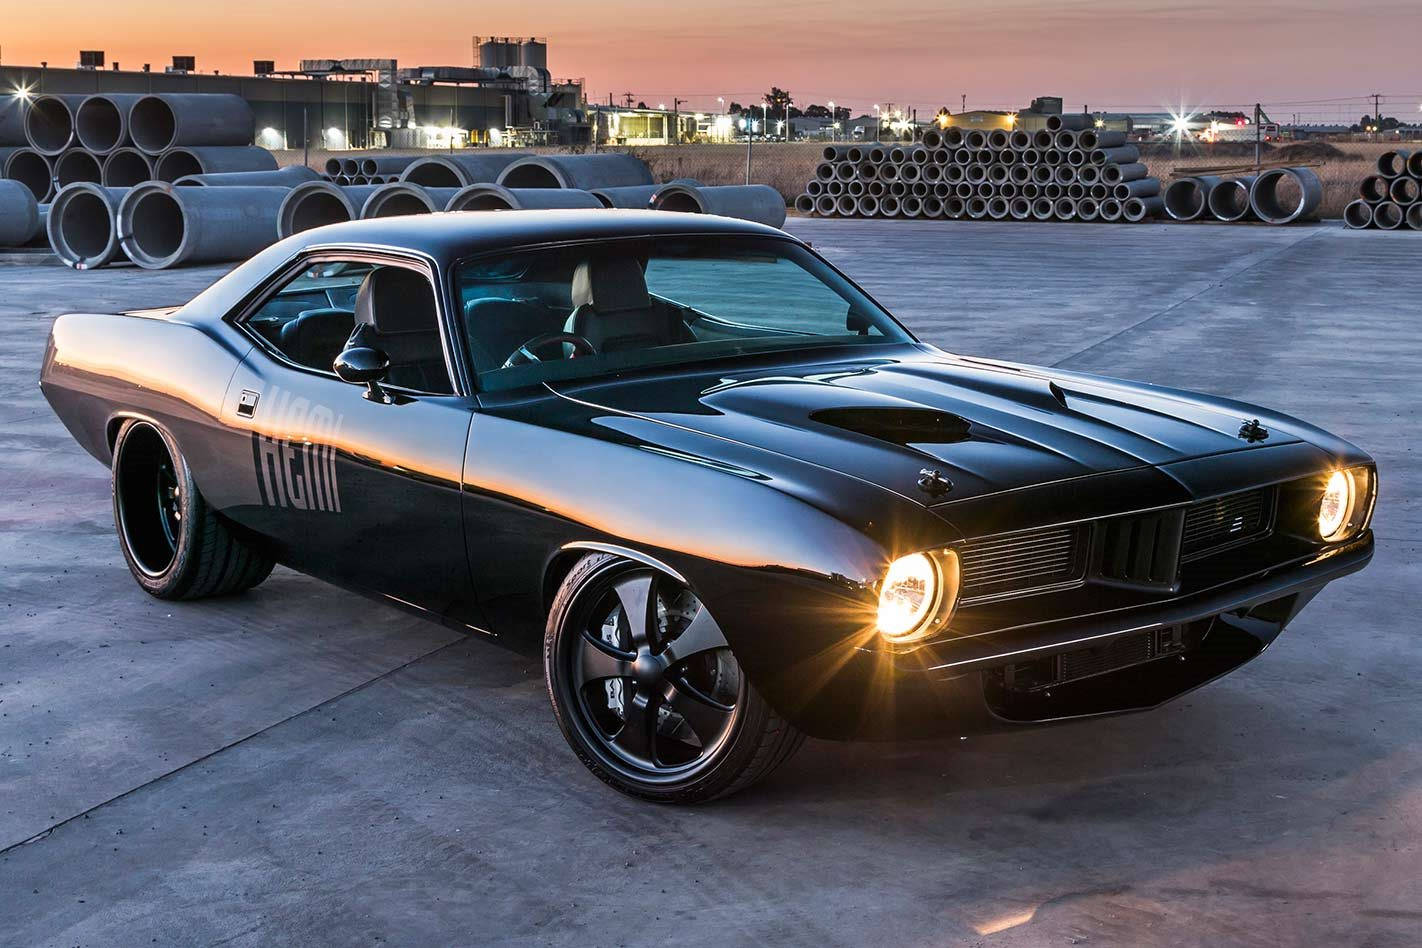 Black Plymouth Barracuda Construction Site Background